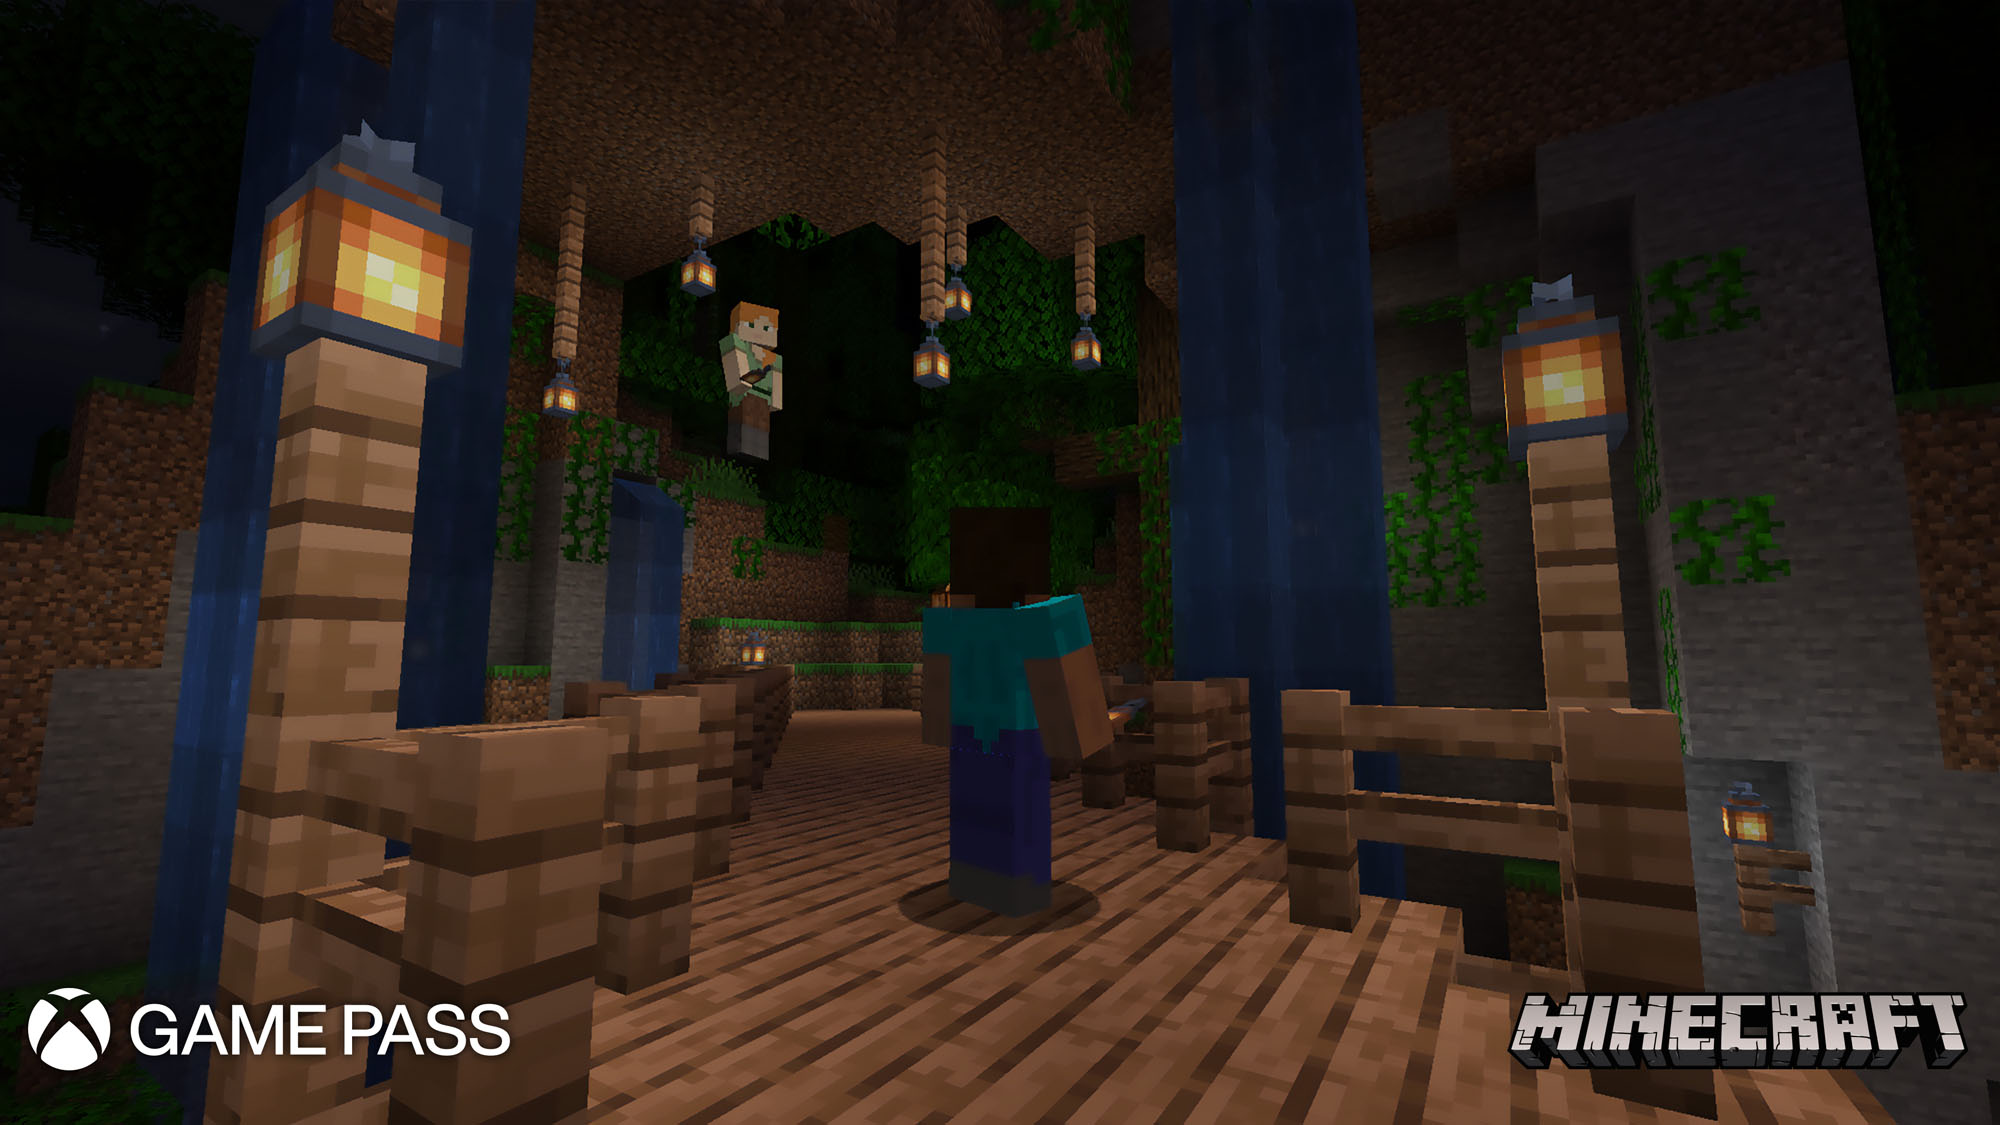 A video game screenshot of blocky Minecraft characters in a below-ground cavern.